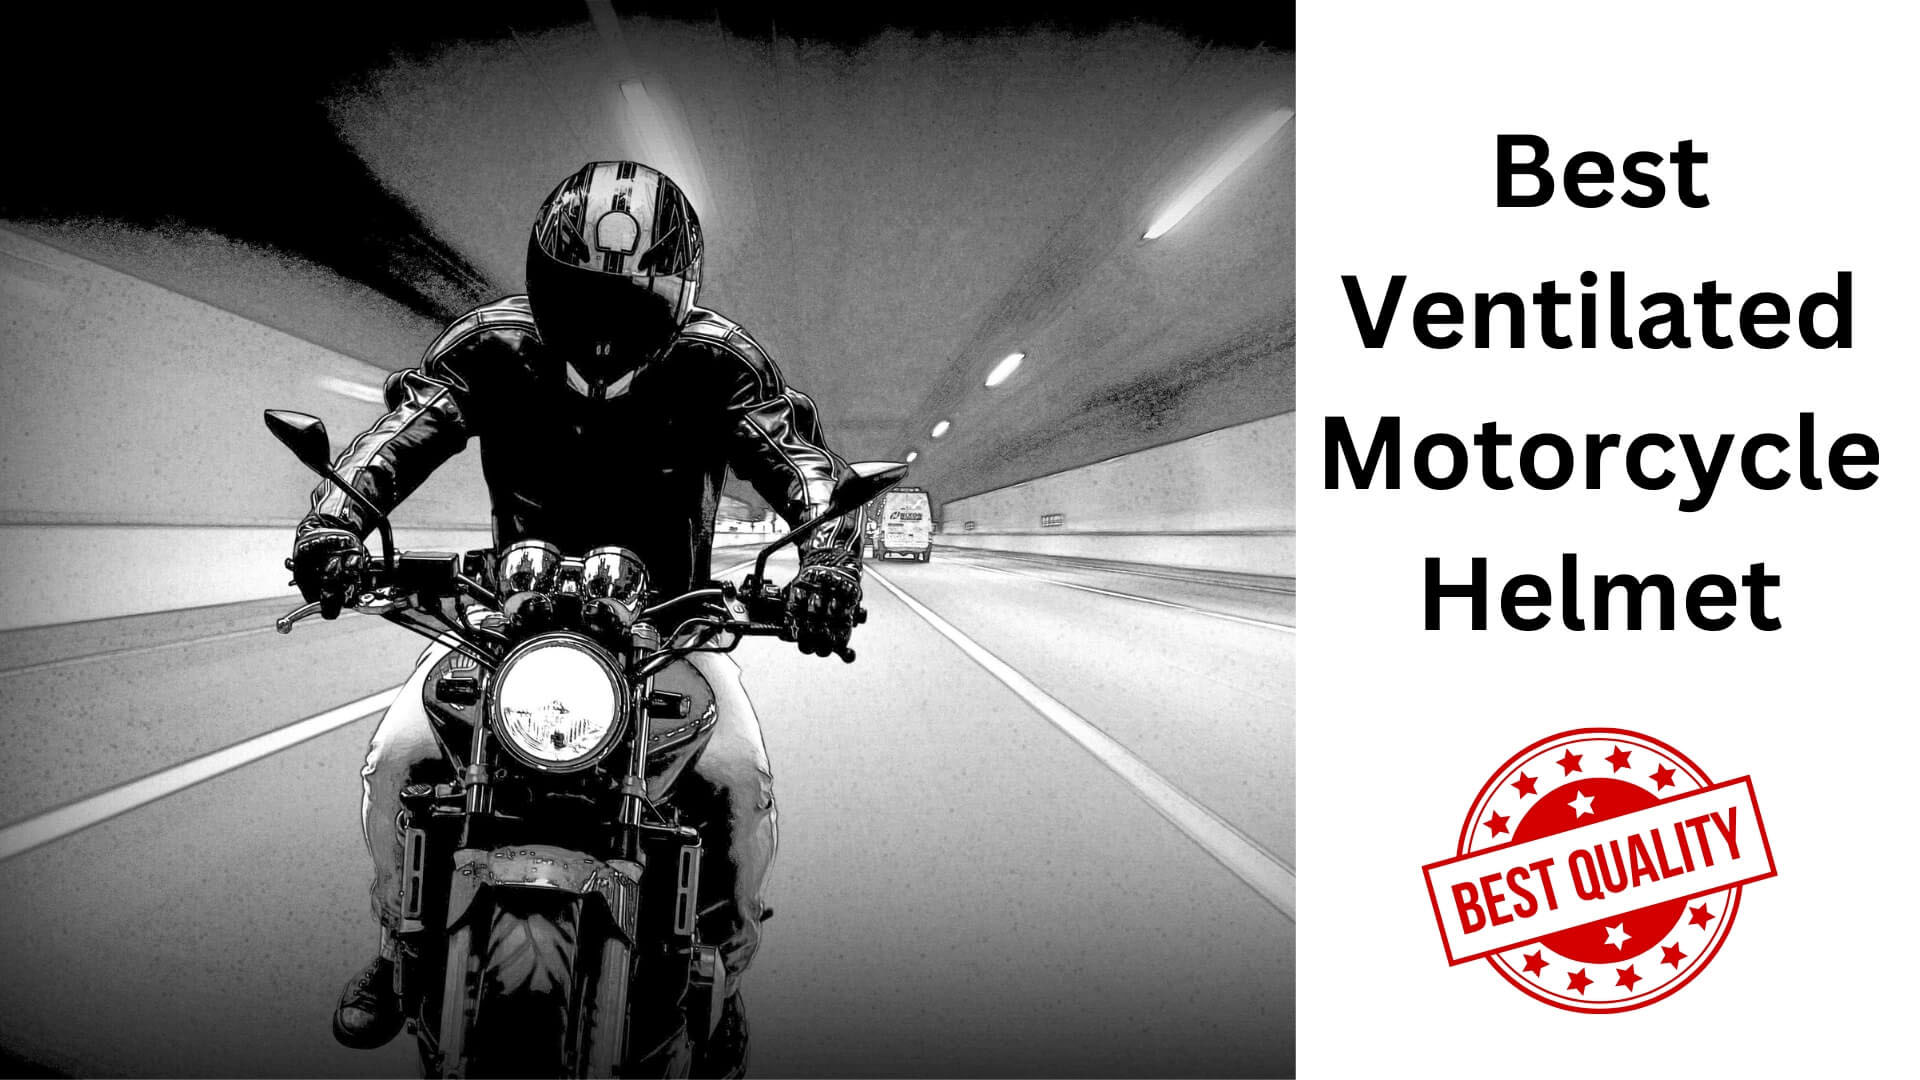 10 Best Ventilated Motorcycle Helmets For Safety And Comfort